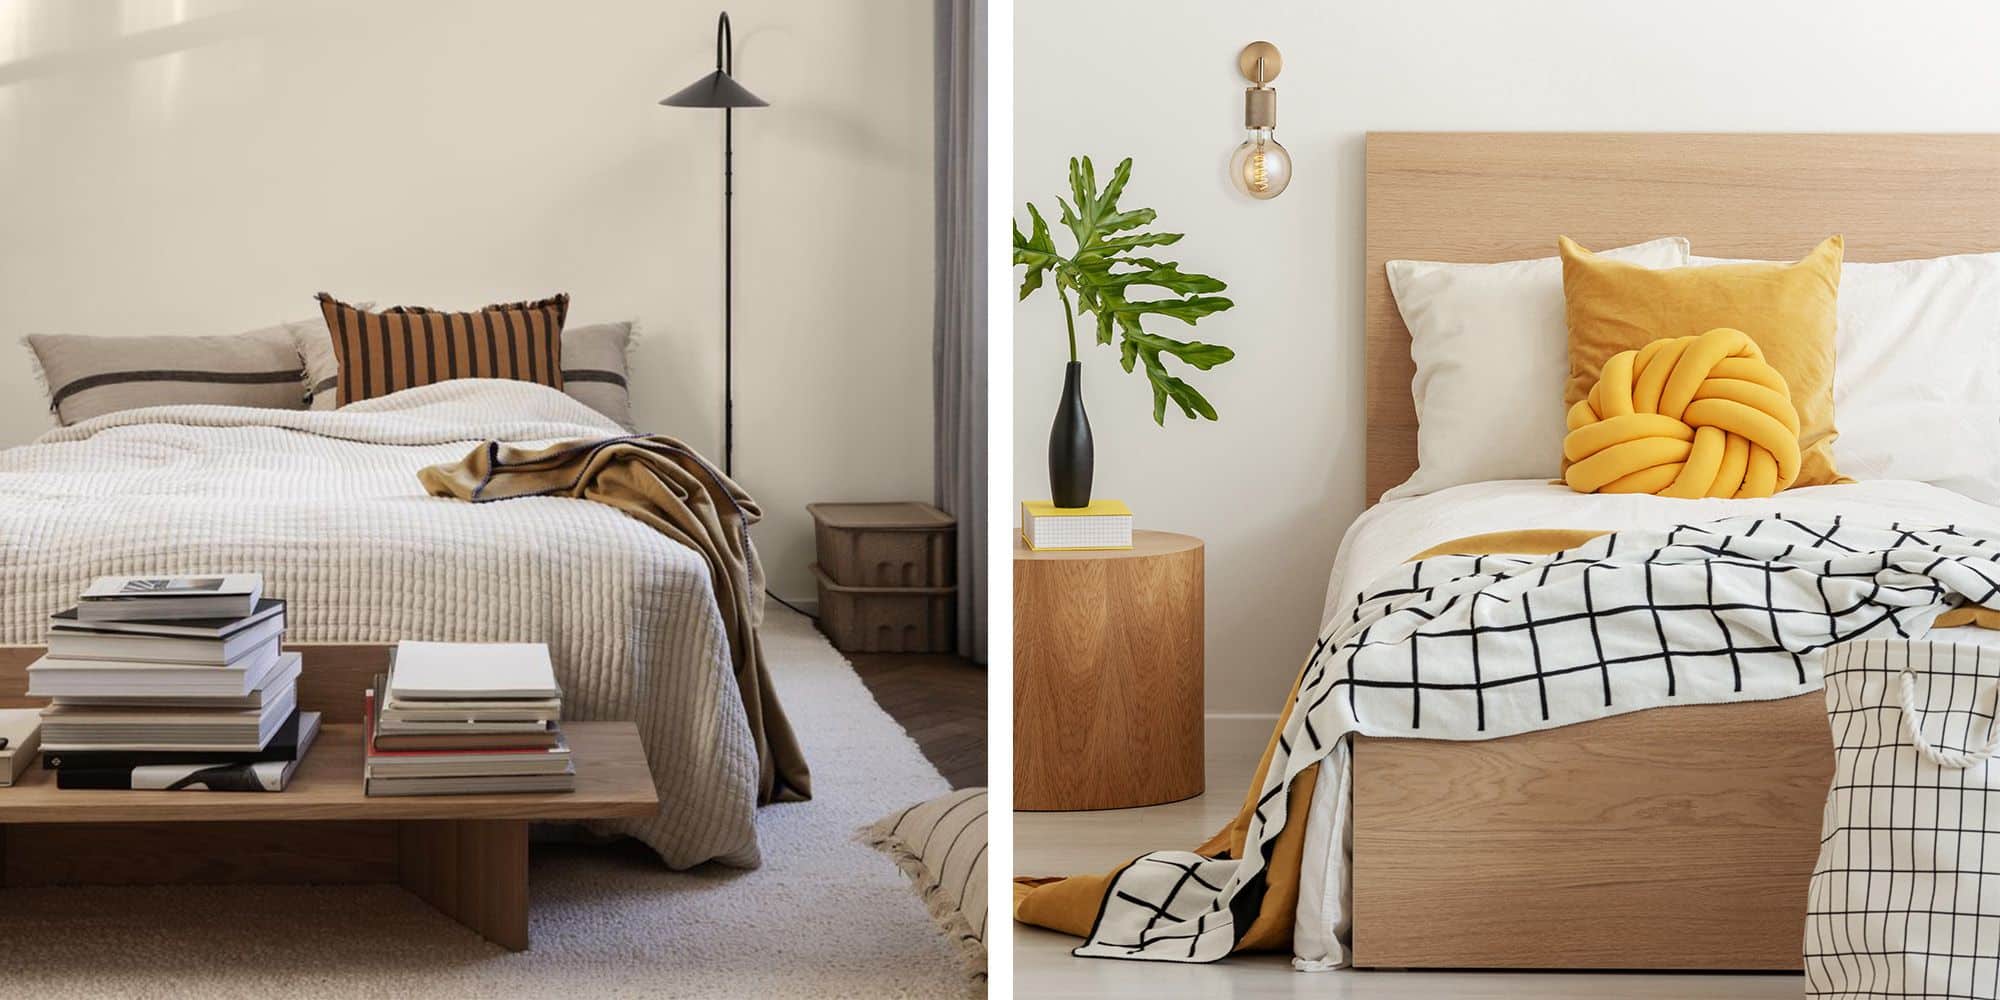 How to Style and Accessorize a Scandinavian Bed?